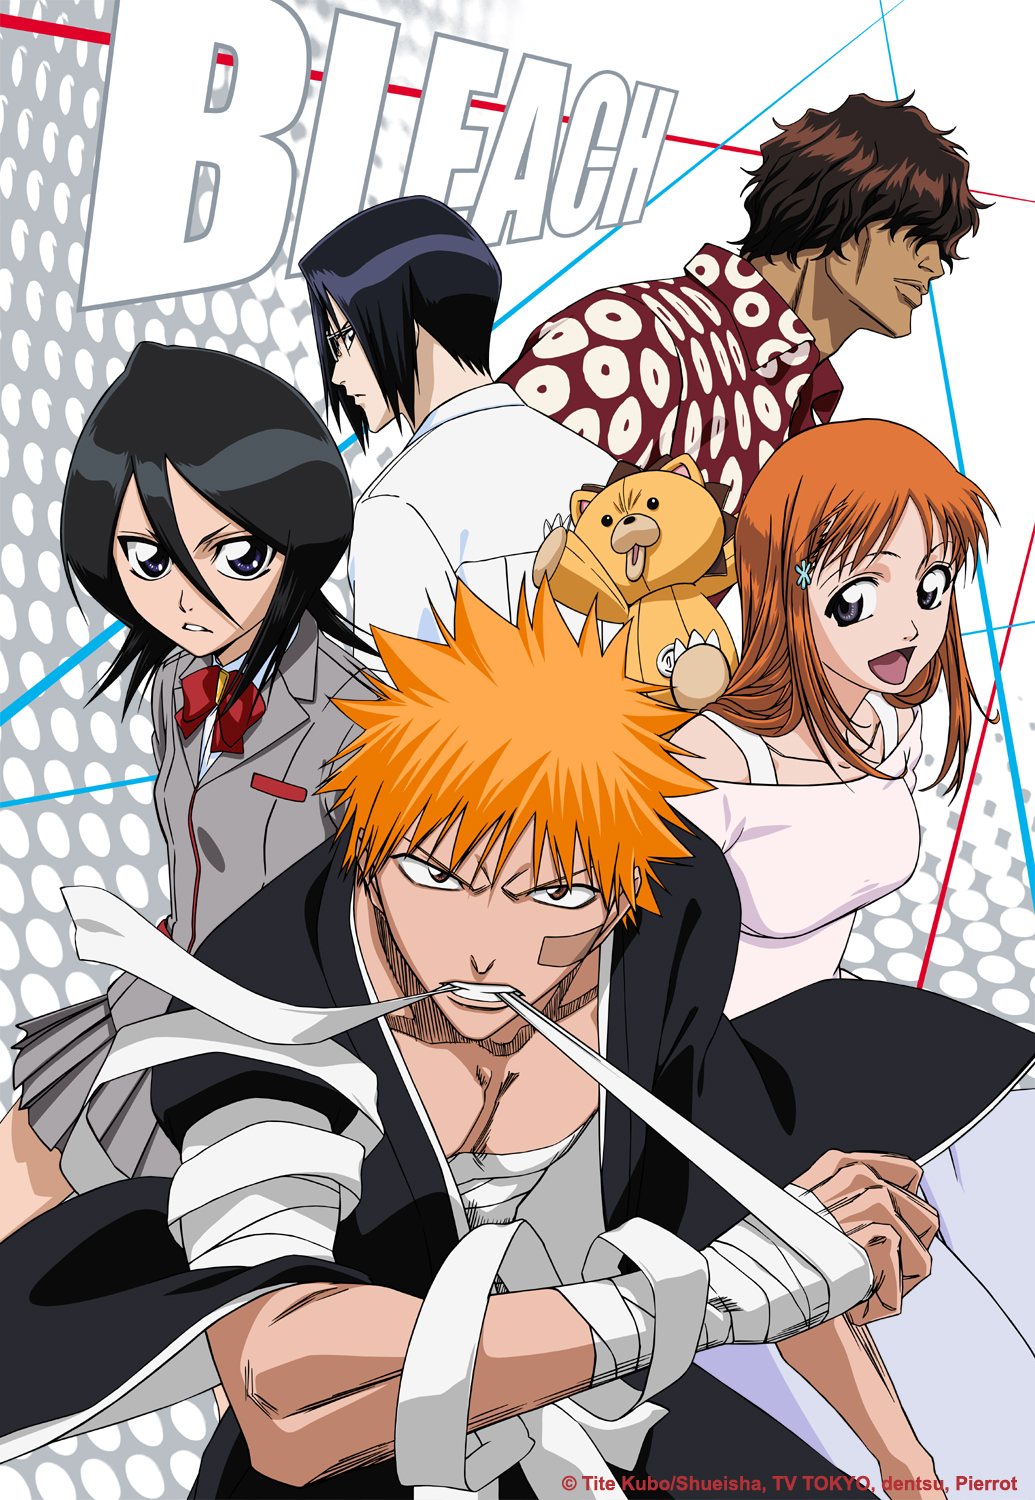 In Bleach, there are soul reapers, hollows, and quincies. It's obvious how  each race has their “own” powers, but what about Orihime and Chad? Aren't  they just humans and how exactly do